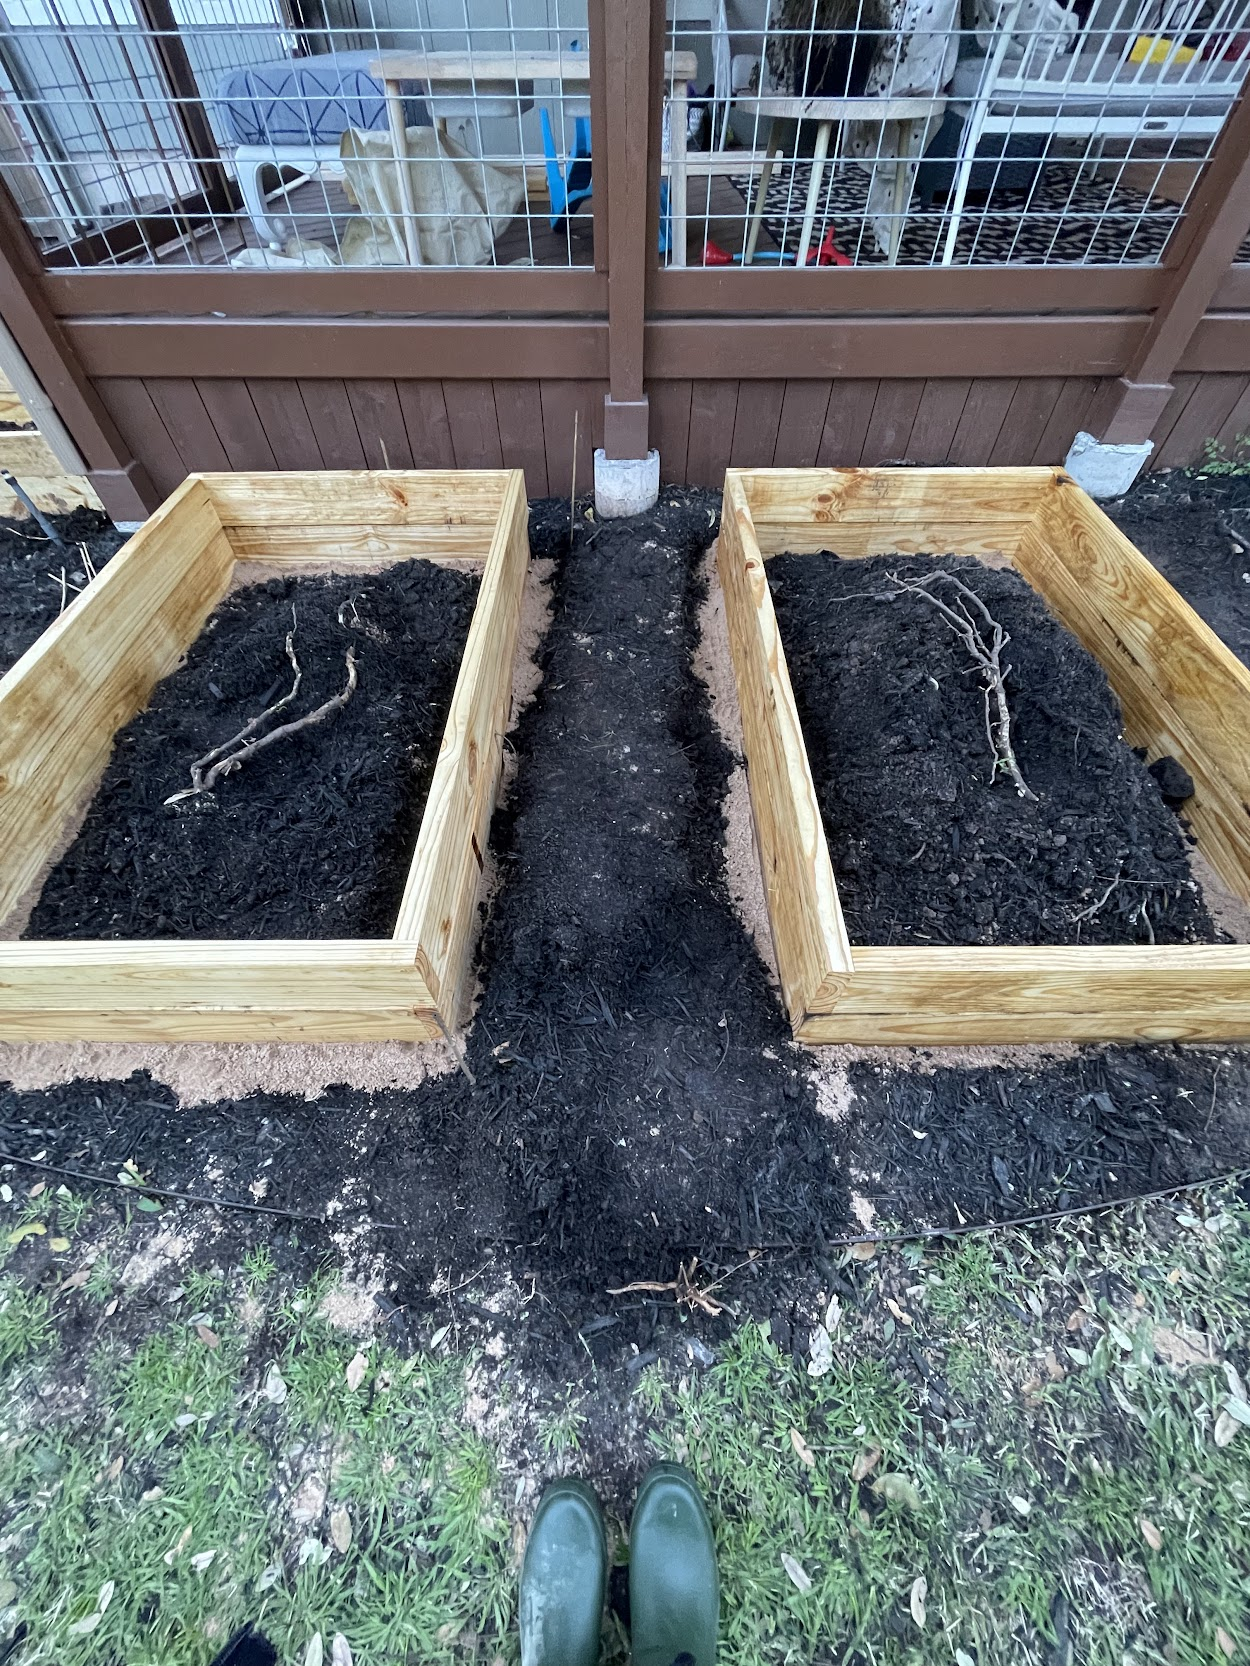 Raised beds sit waiting to be filled with organic material from the garden.